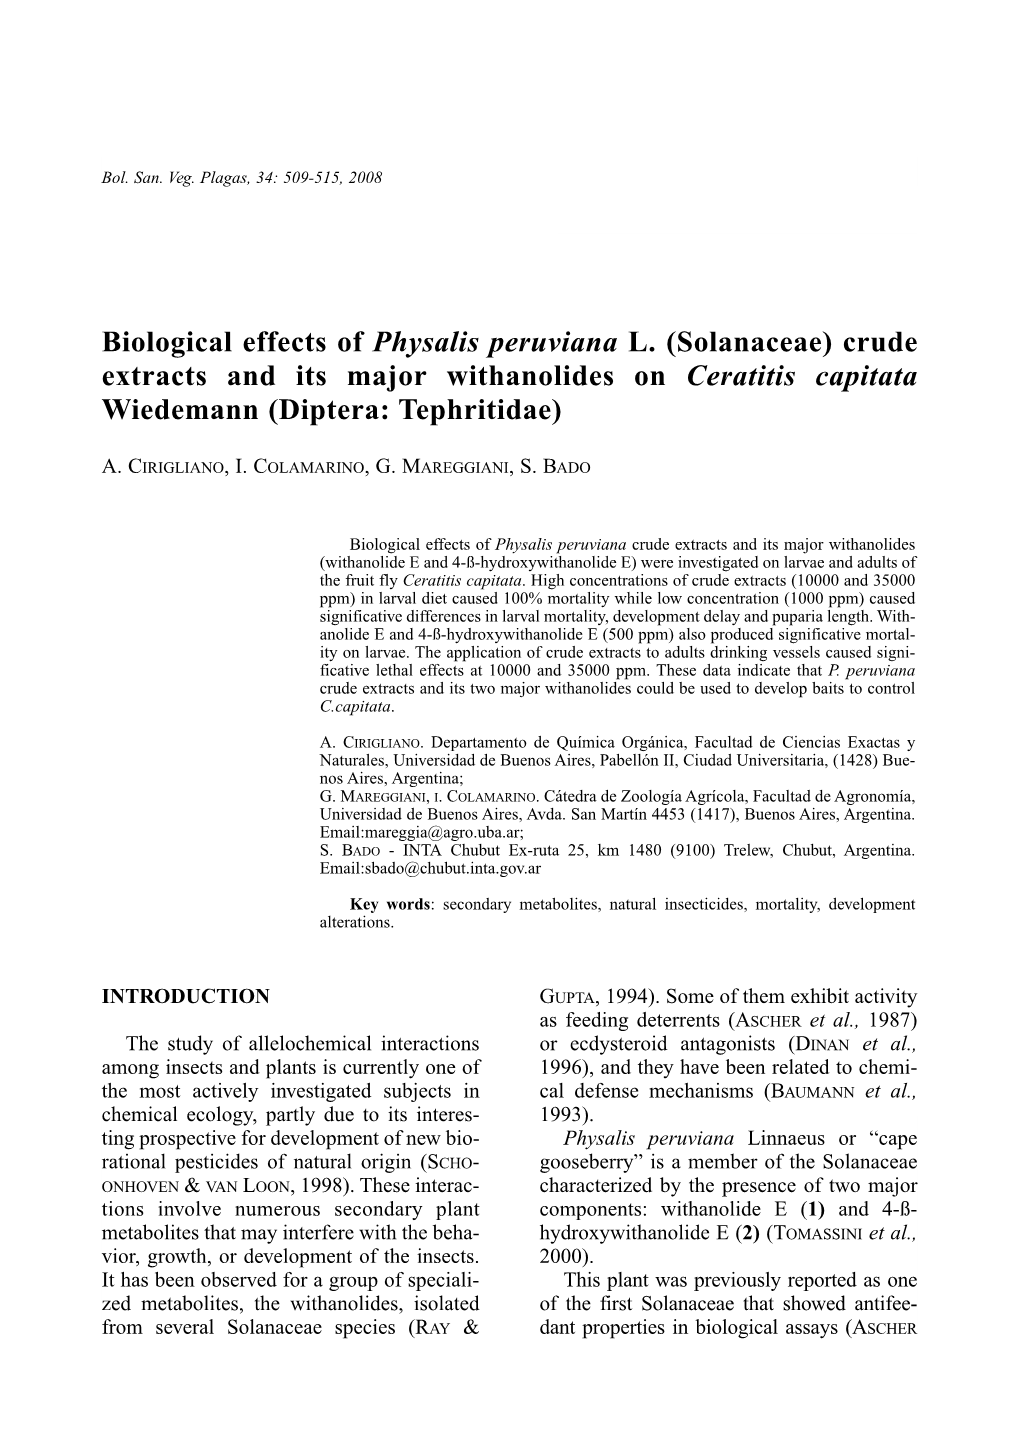 Biological Effects of Physalis Peruviana L. (Solanaceae) Crude Extracts and Its Major Withanolides on Ceratitis Capitata Wiedemann (Diptera: Tephritidae)